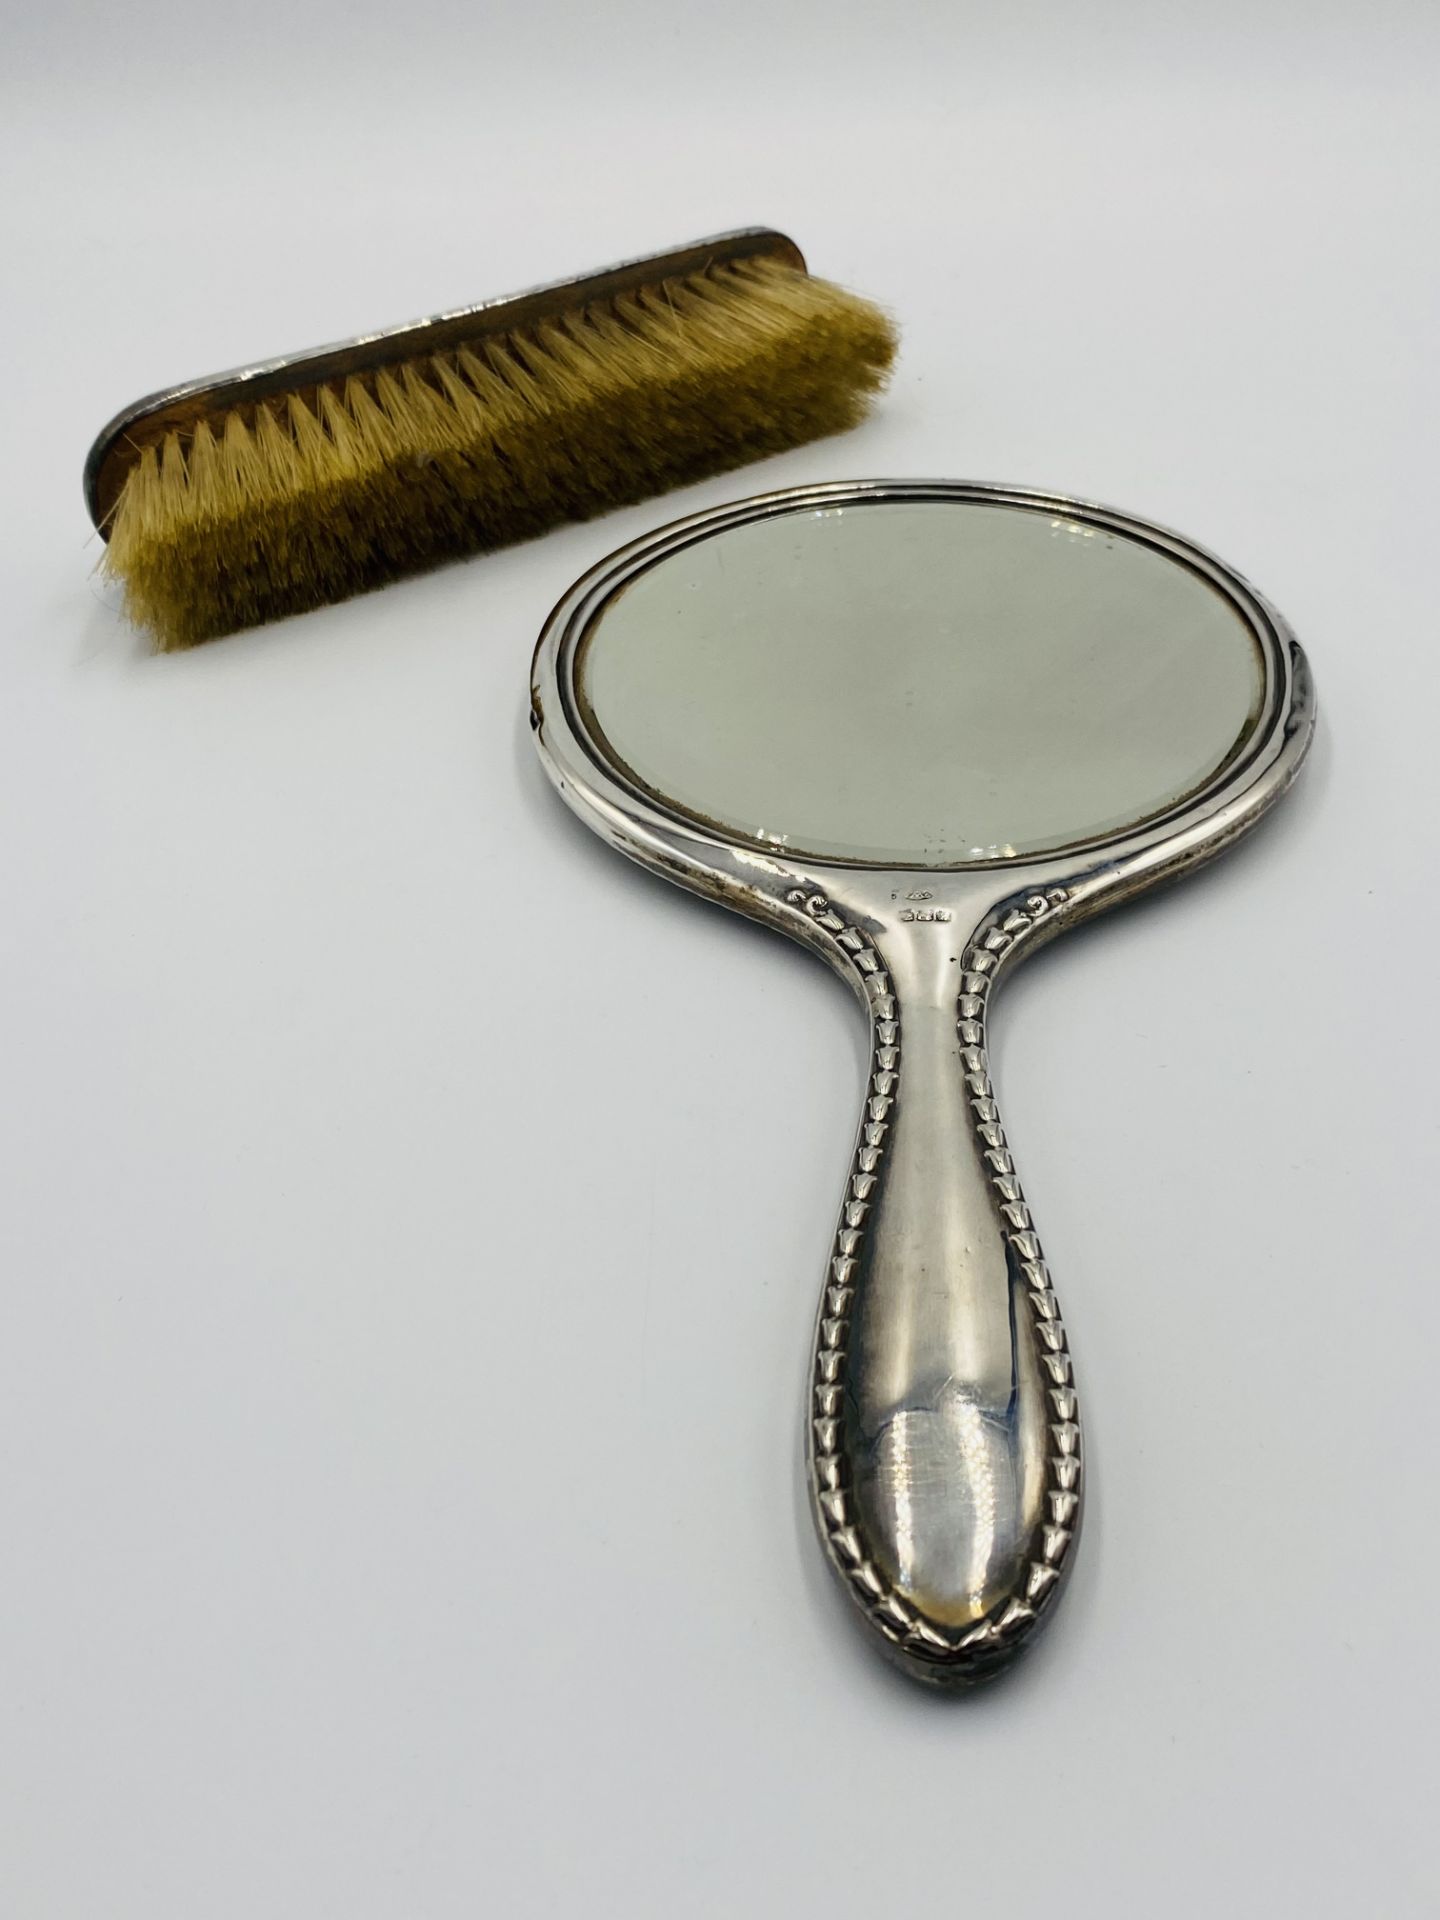 Silver backed dressing table mirror and brush - Image 6 of 6